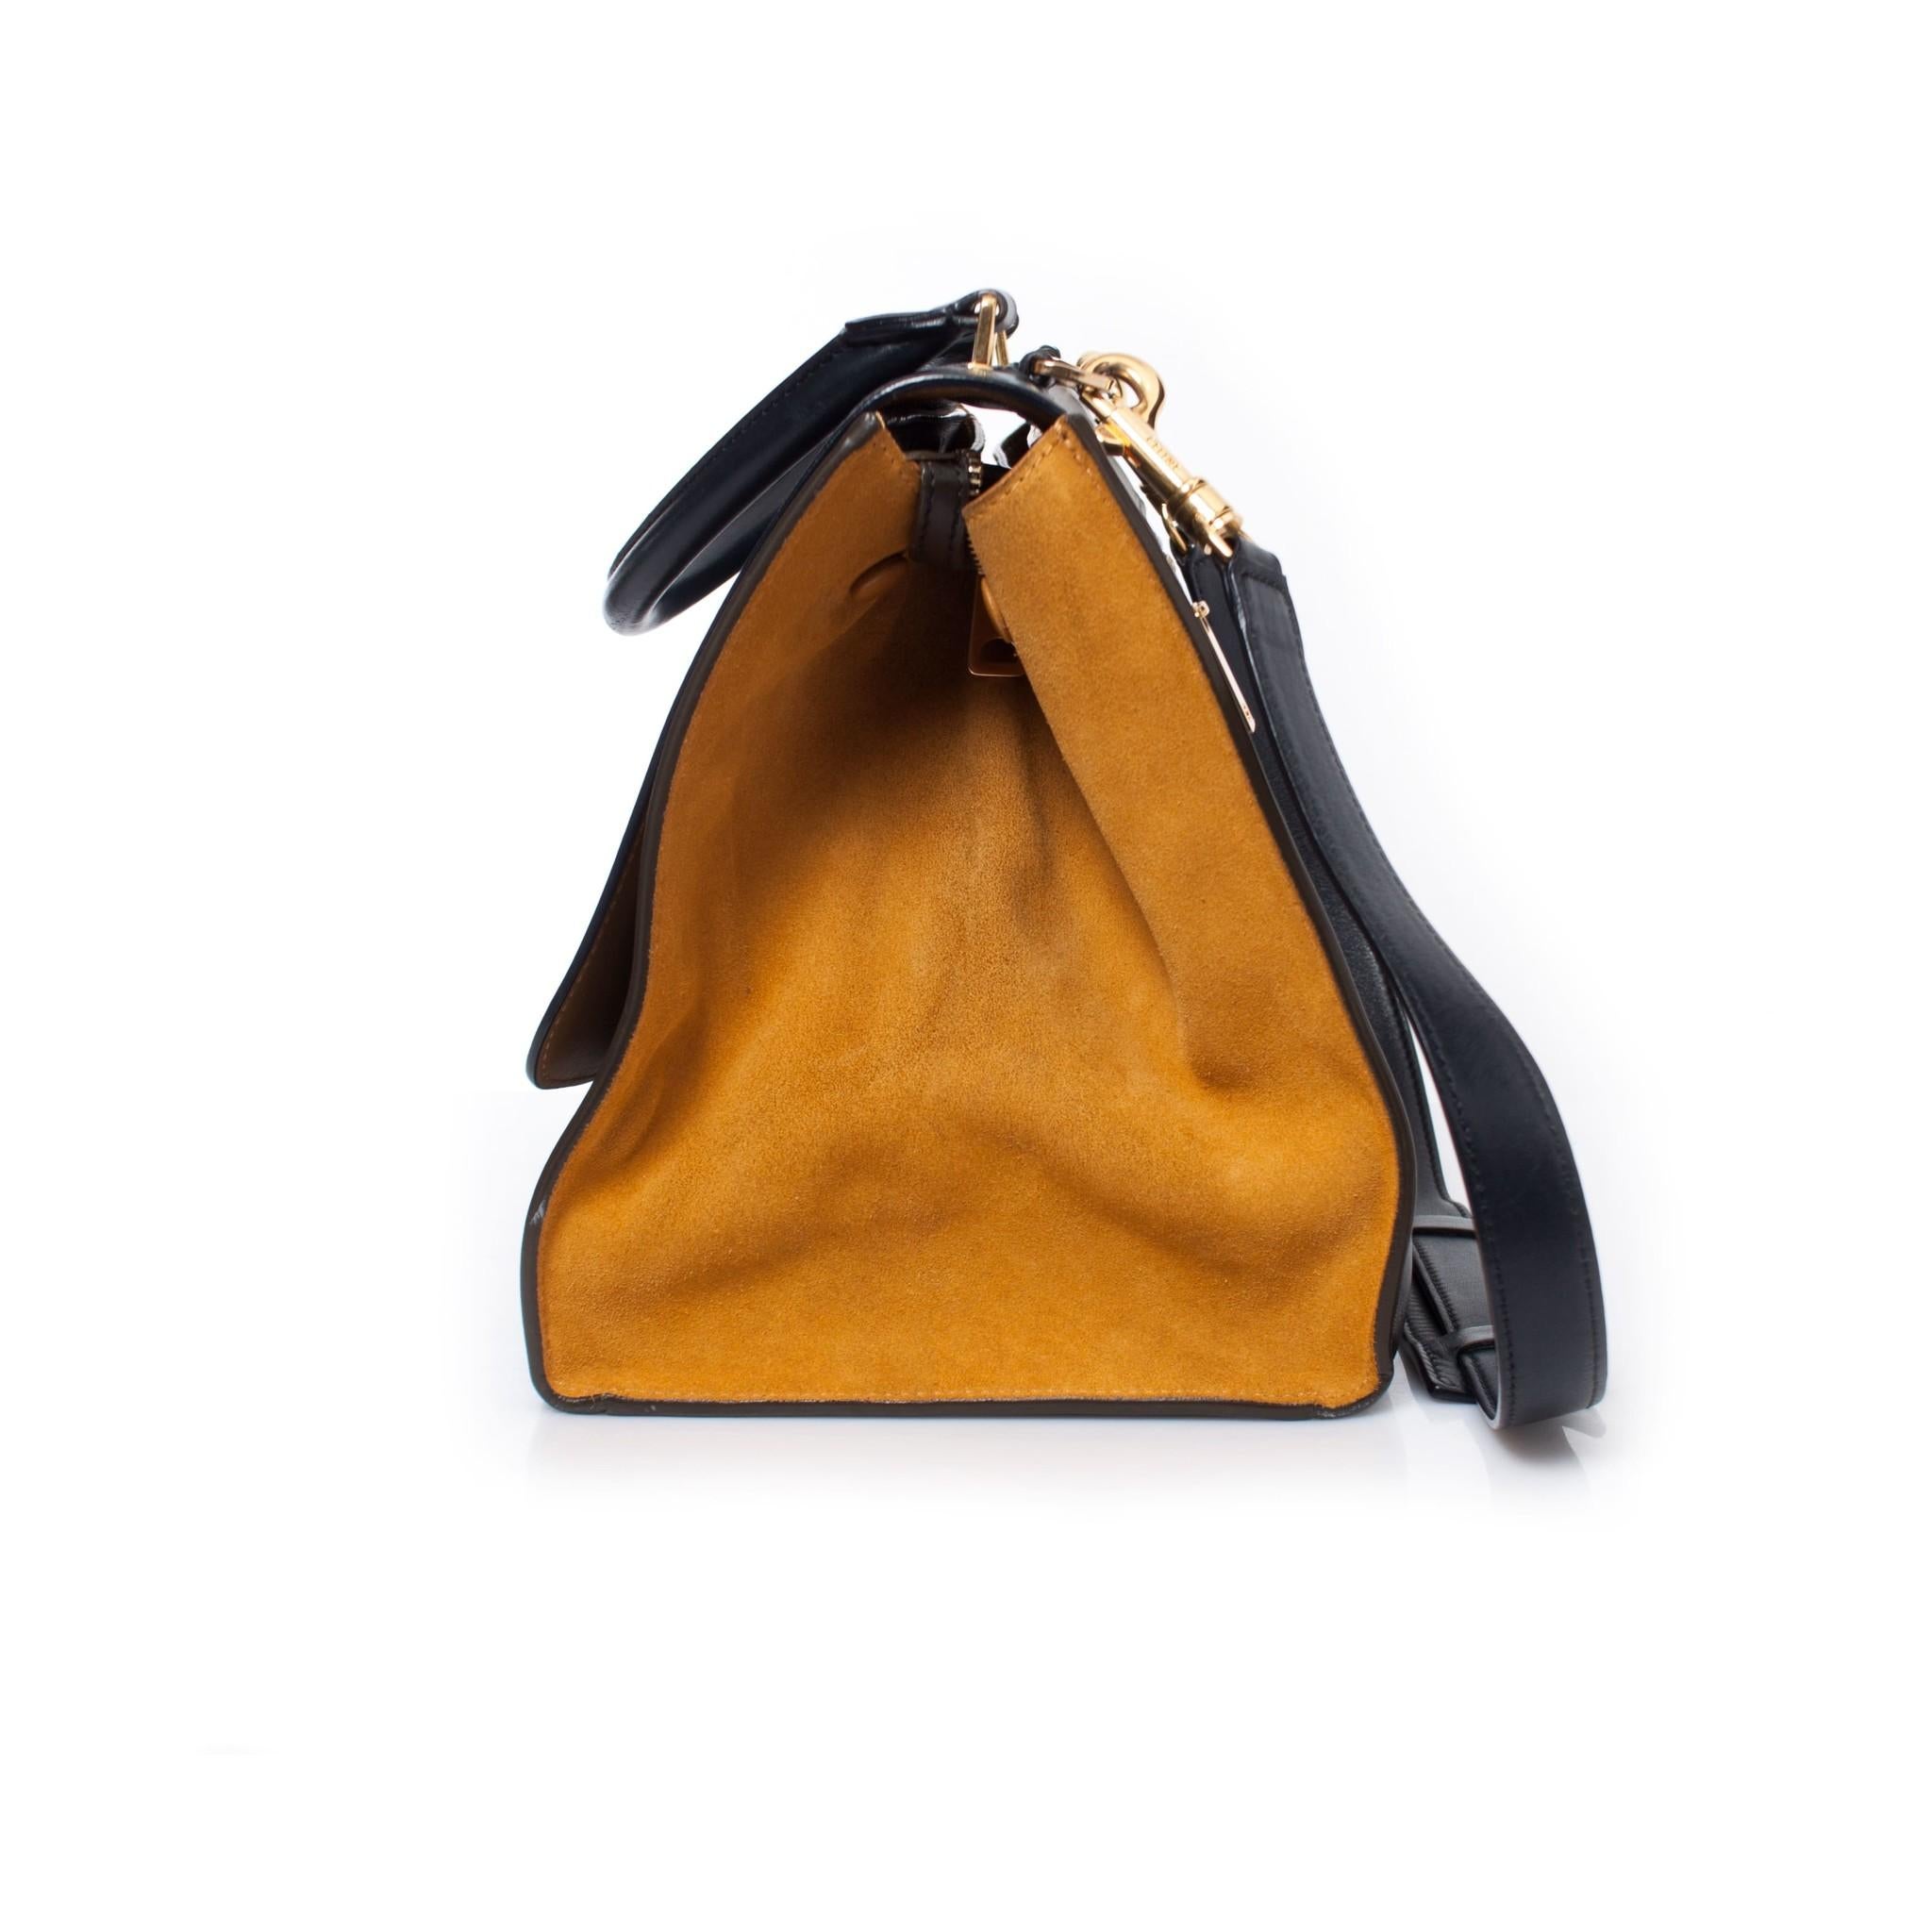 Celine, Tricolor Trapeze bag in yellow, navy and black. This piece has been used very little and is in very good condition. Comes with dustbag.

• CONDITION: very good condition

• SIZE: one size

• MEASUREMENTS: height 22 cm, width bottom 30 cm,